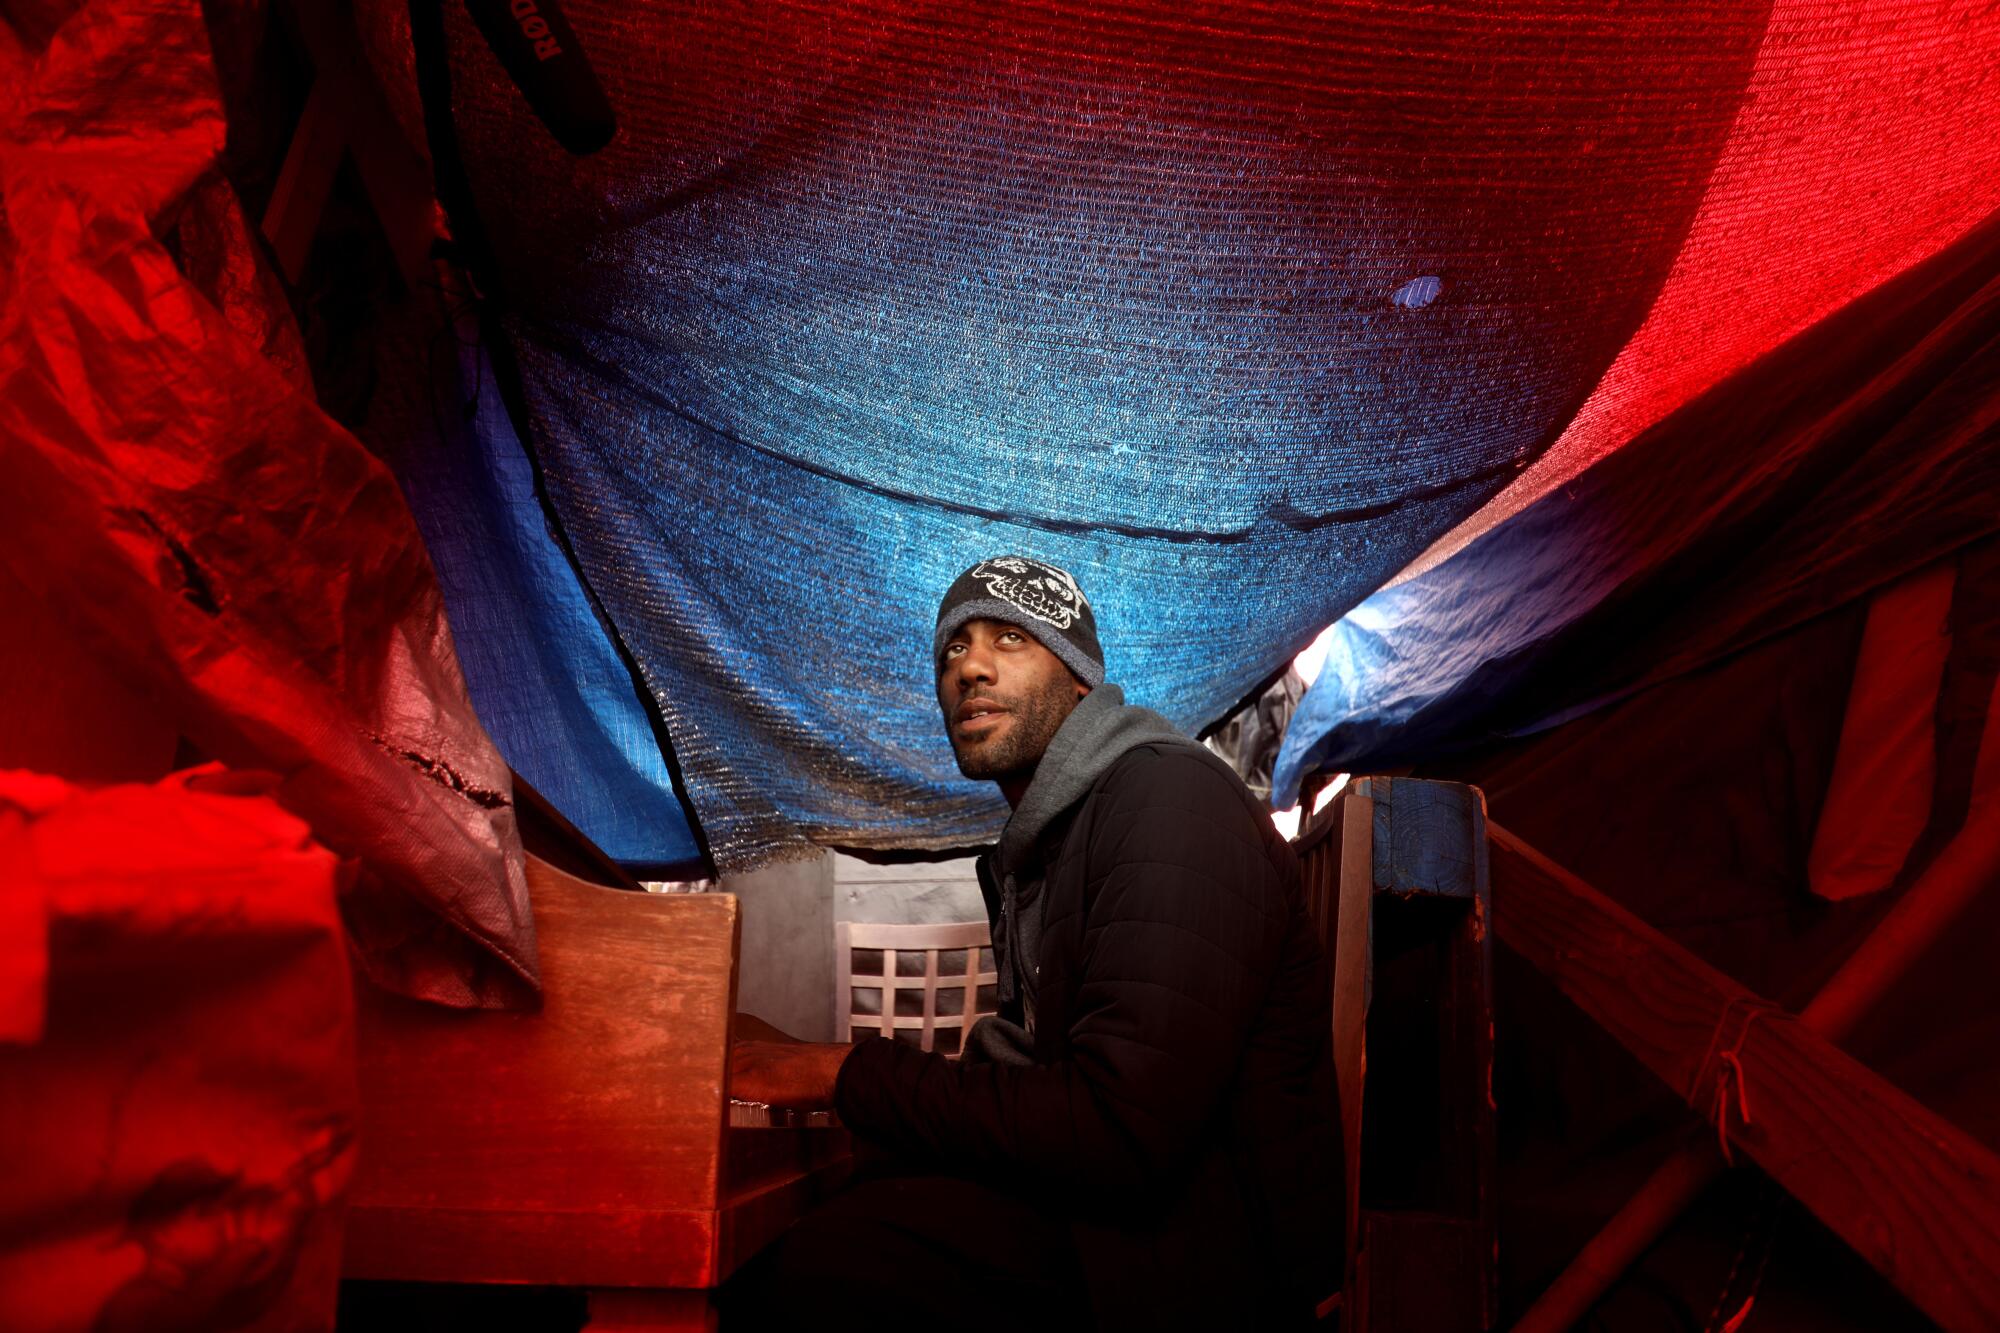 A man plays his piano inside his tent.